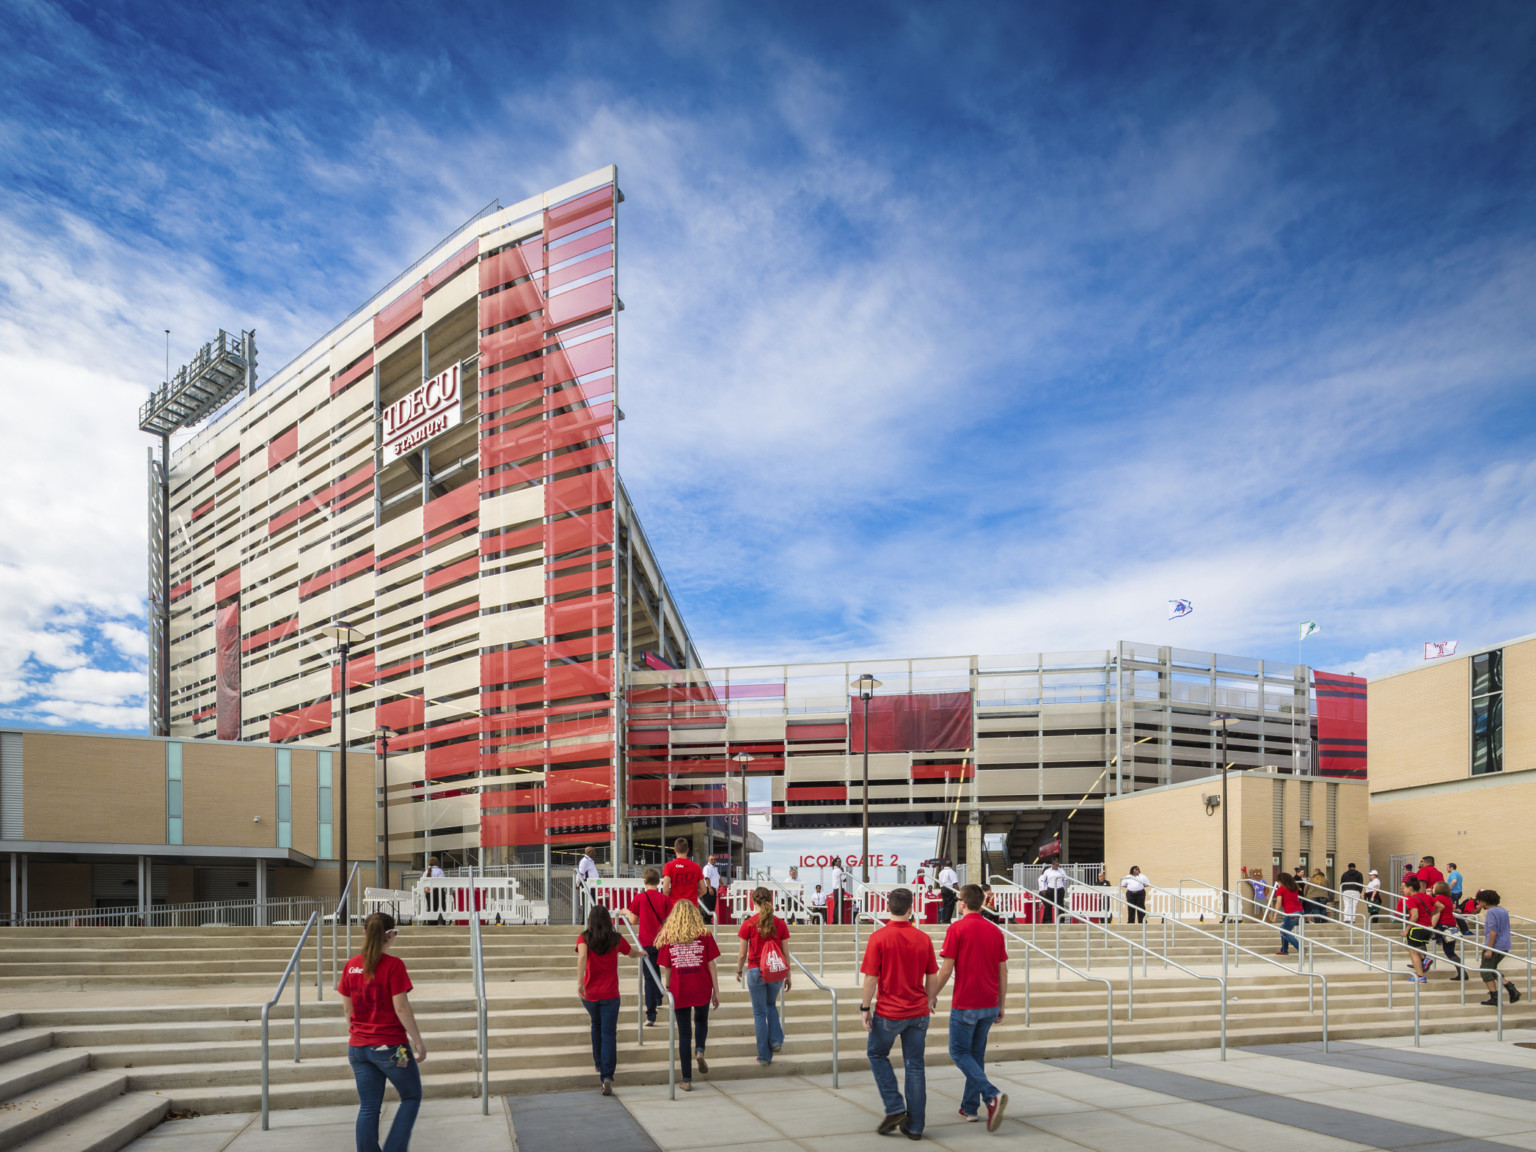 Stadium with red and white sunscreen wrapped angularly along facade. Stairs lead to entrance, center, between stone buildings